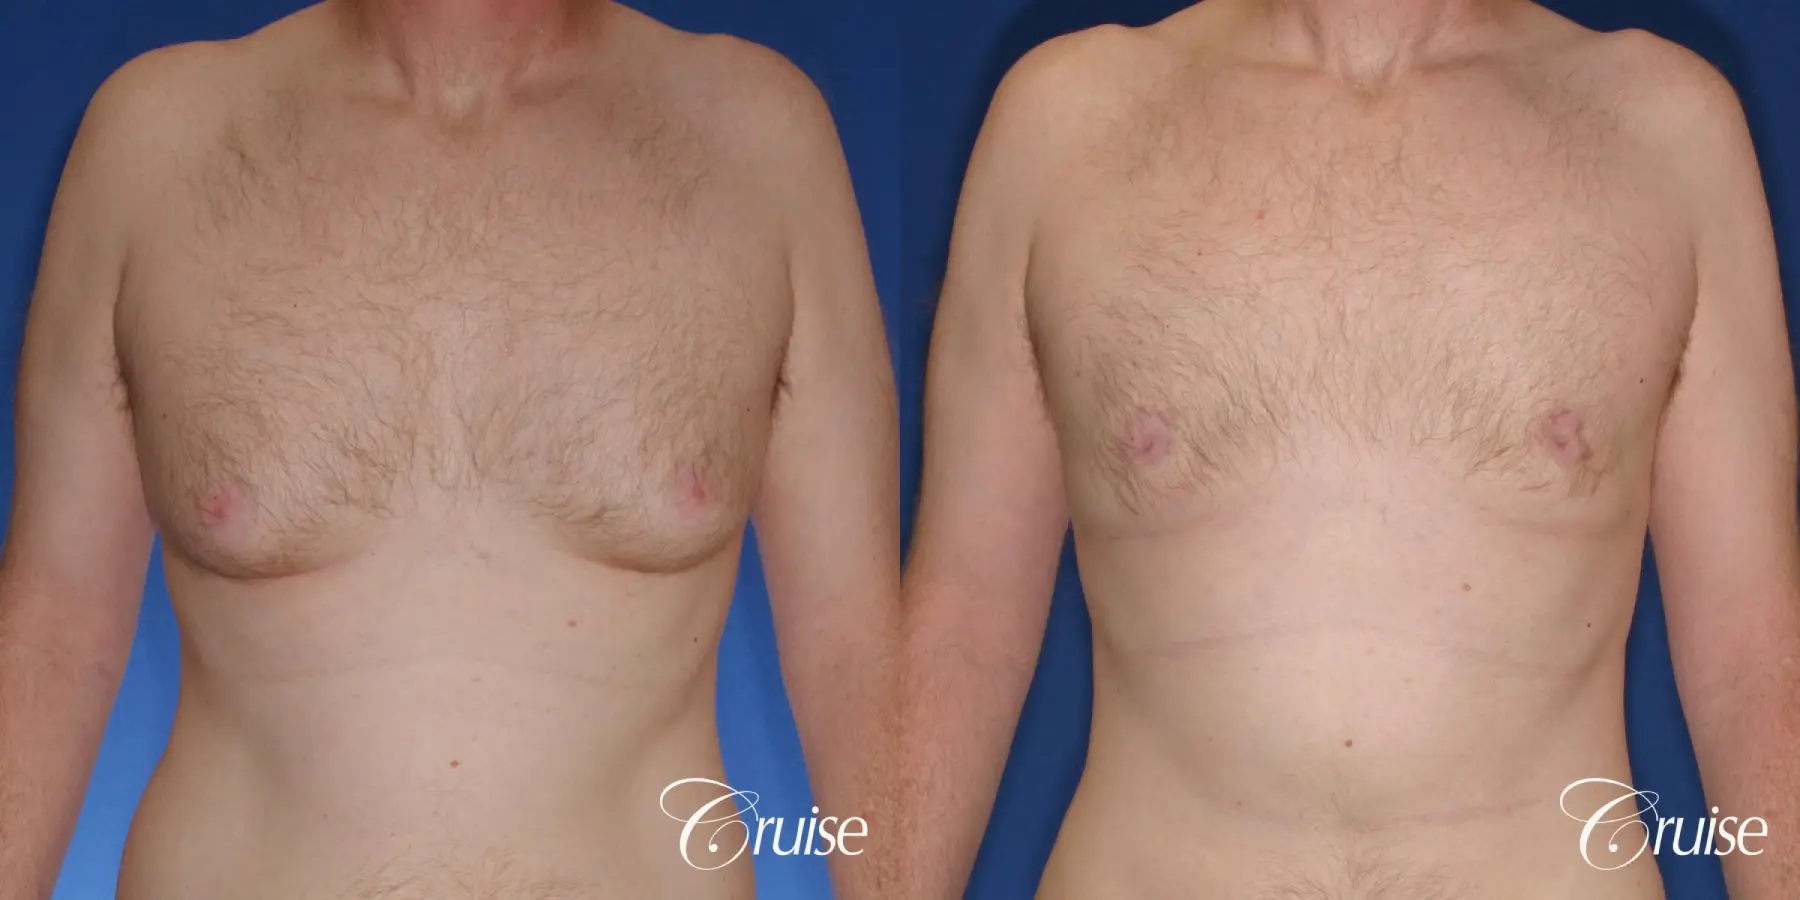 best donut lift with gynecomastia surgery - Before and After 1